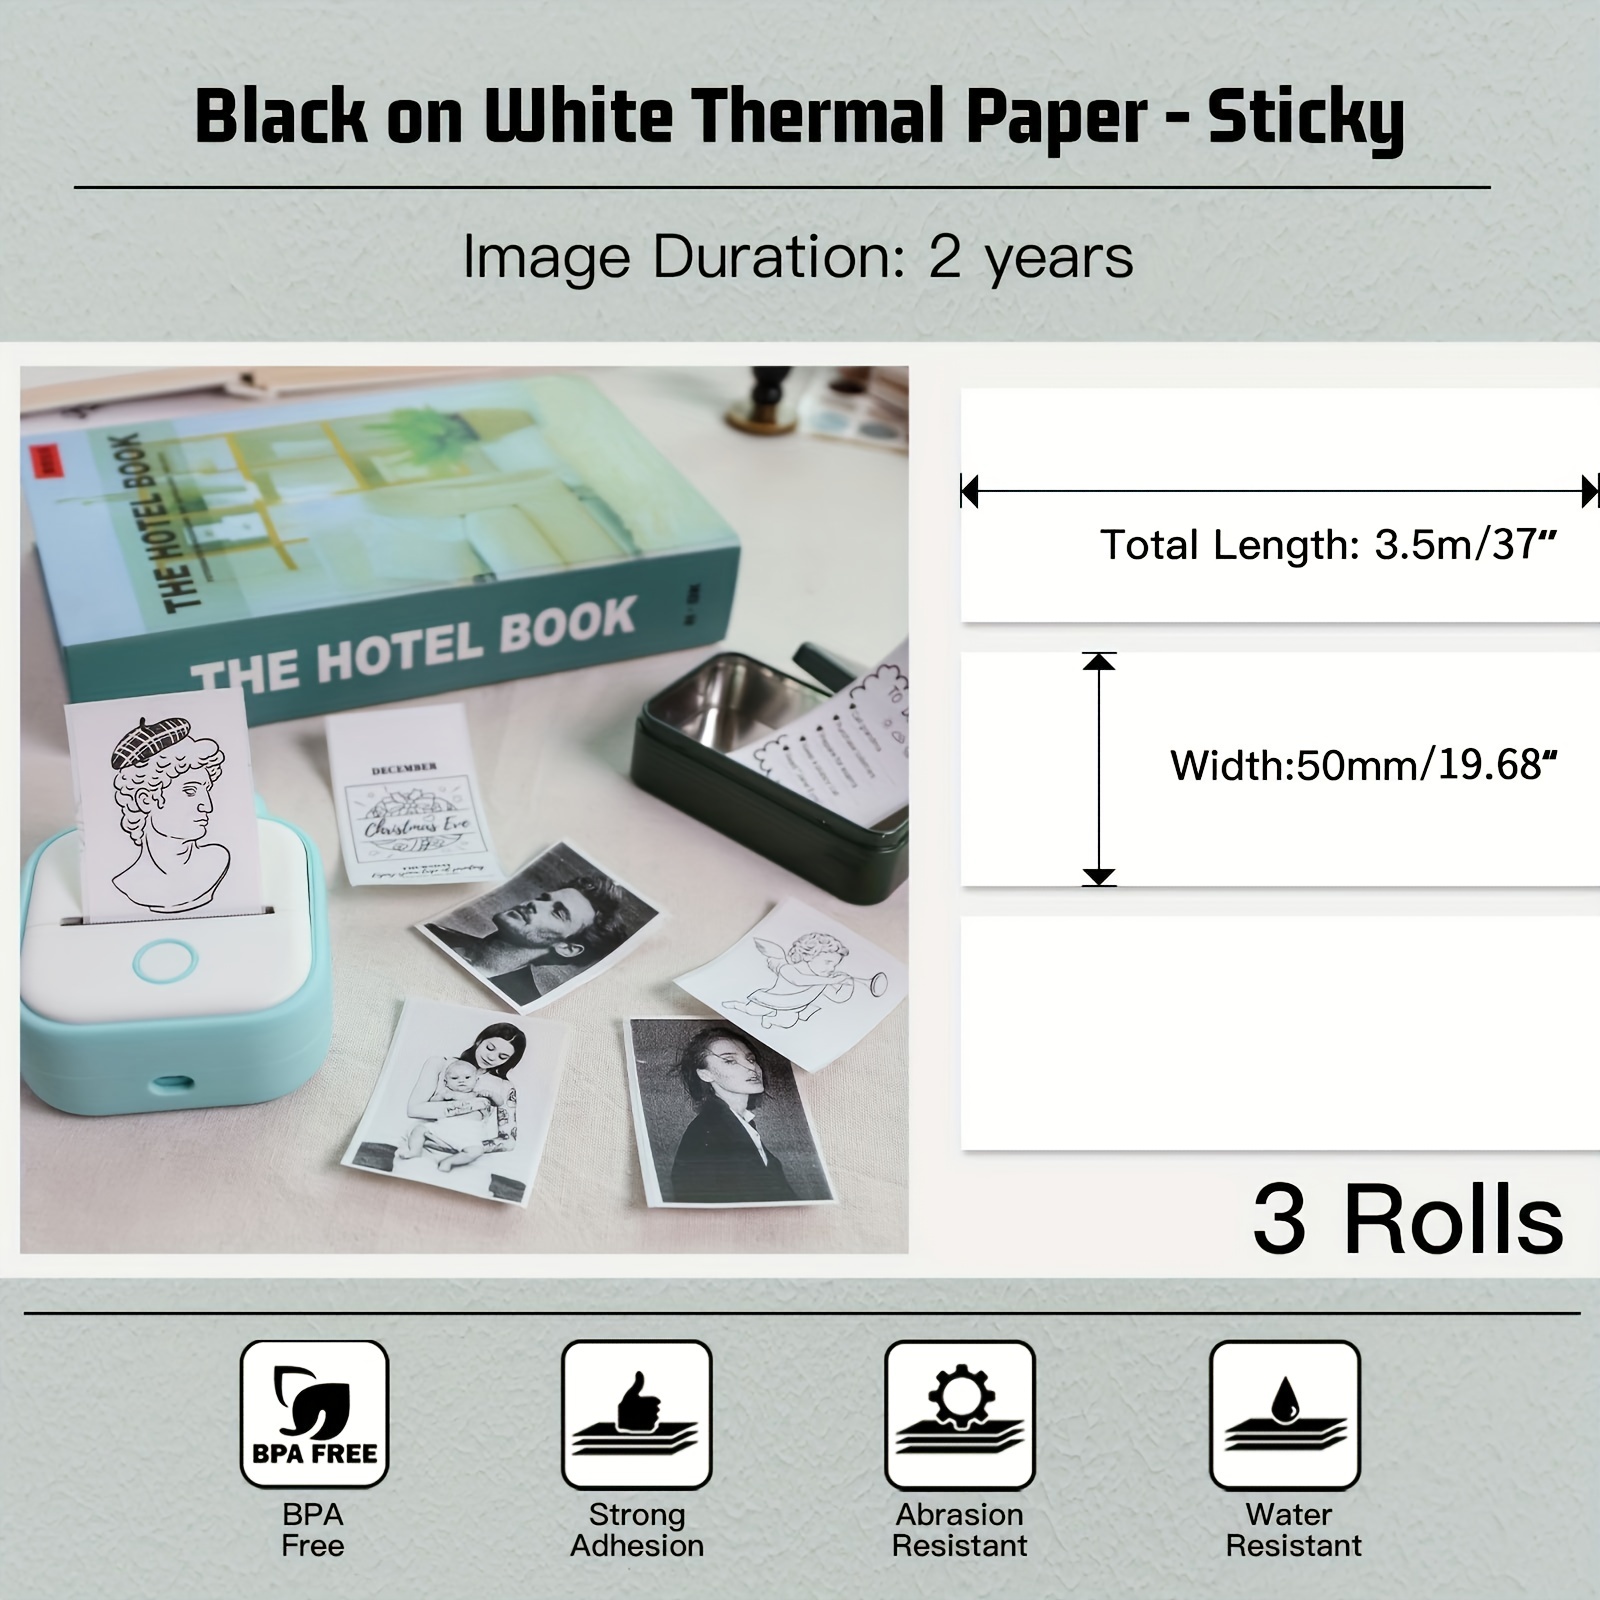 T02 Thermal Mini Sticker Printer Paper, White Self-Adhesive Paper, Black on White Paper for Journal, Photo, to Do List, 50mm x 3.5M, 3 Rolls, Keep